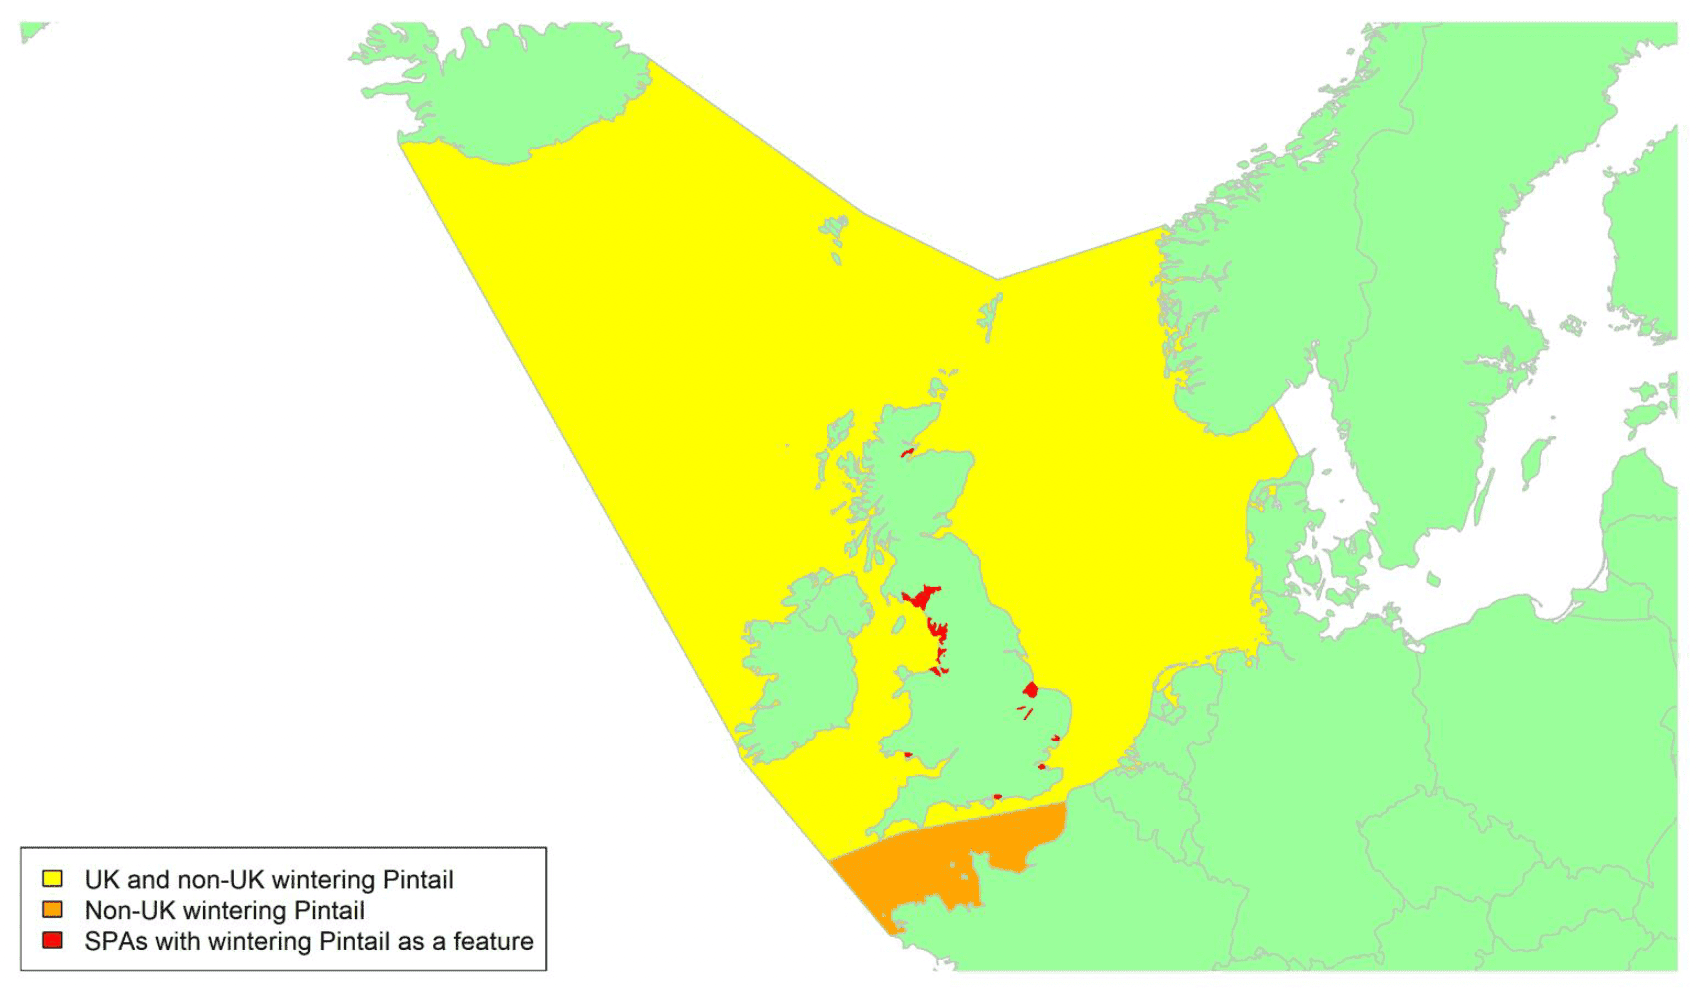 Map of North West Europe showing migratory routes and SPAs within the UK for Pintail as described in the text below.